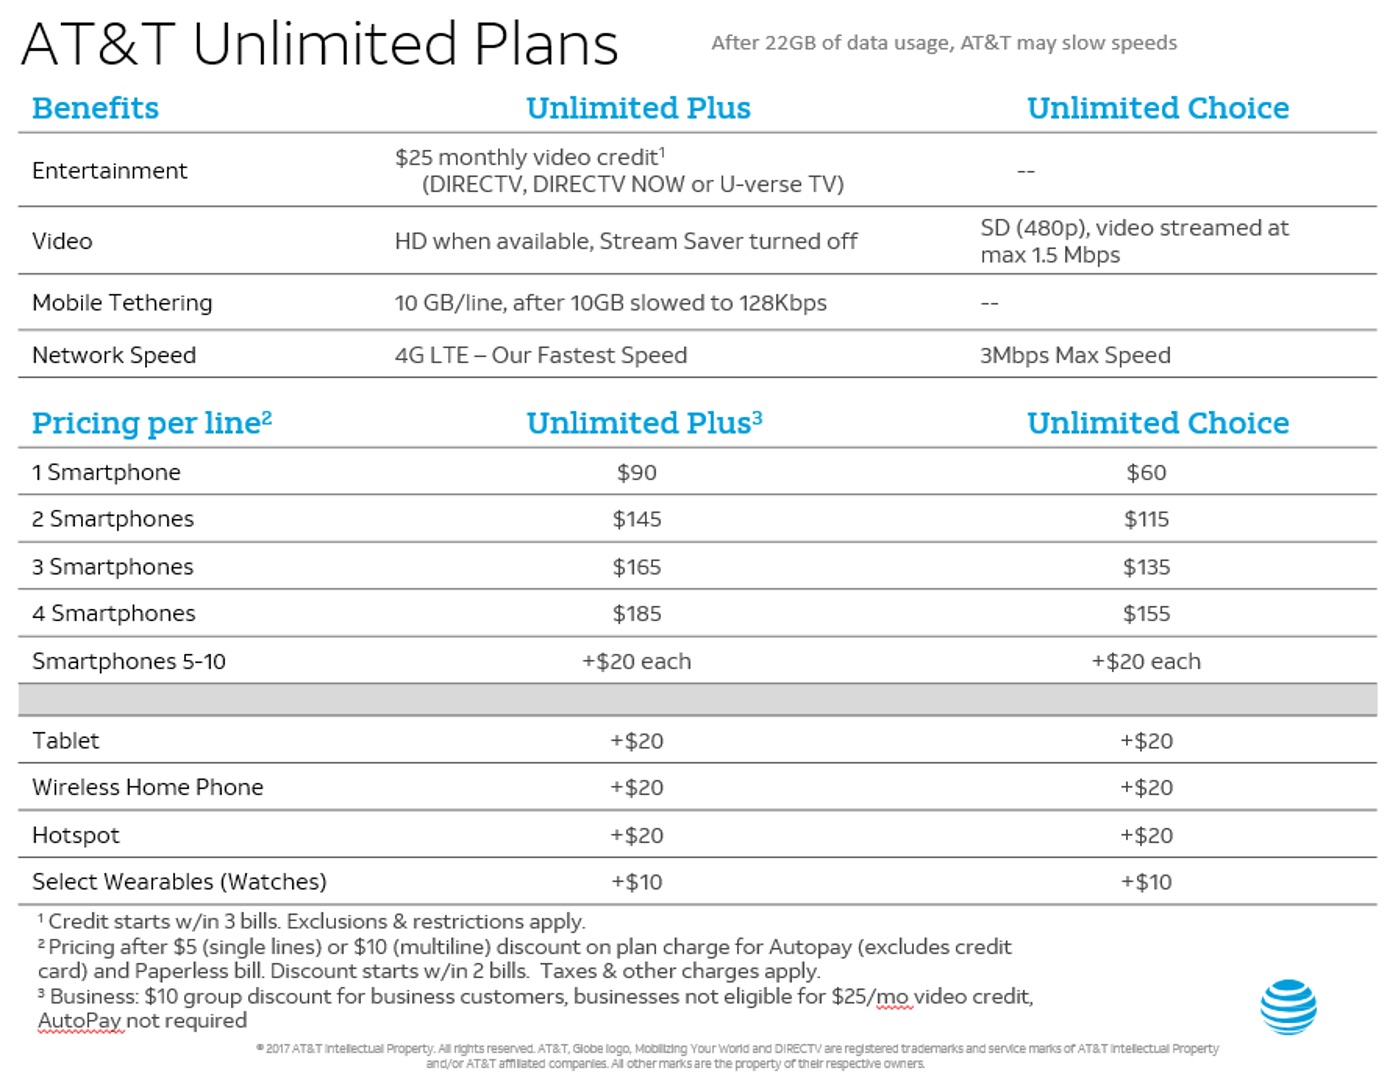 AT&T lowers unlimited data price to 90, adds 10GB of tethering Ars